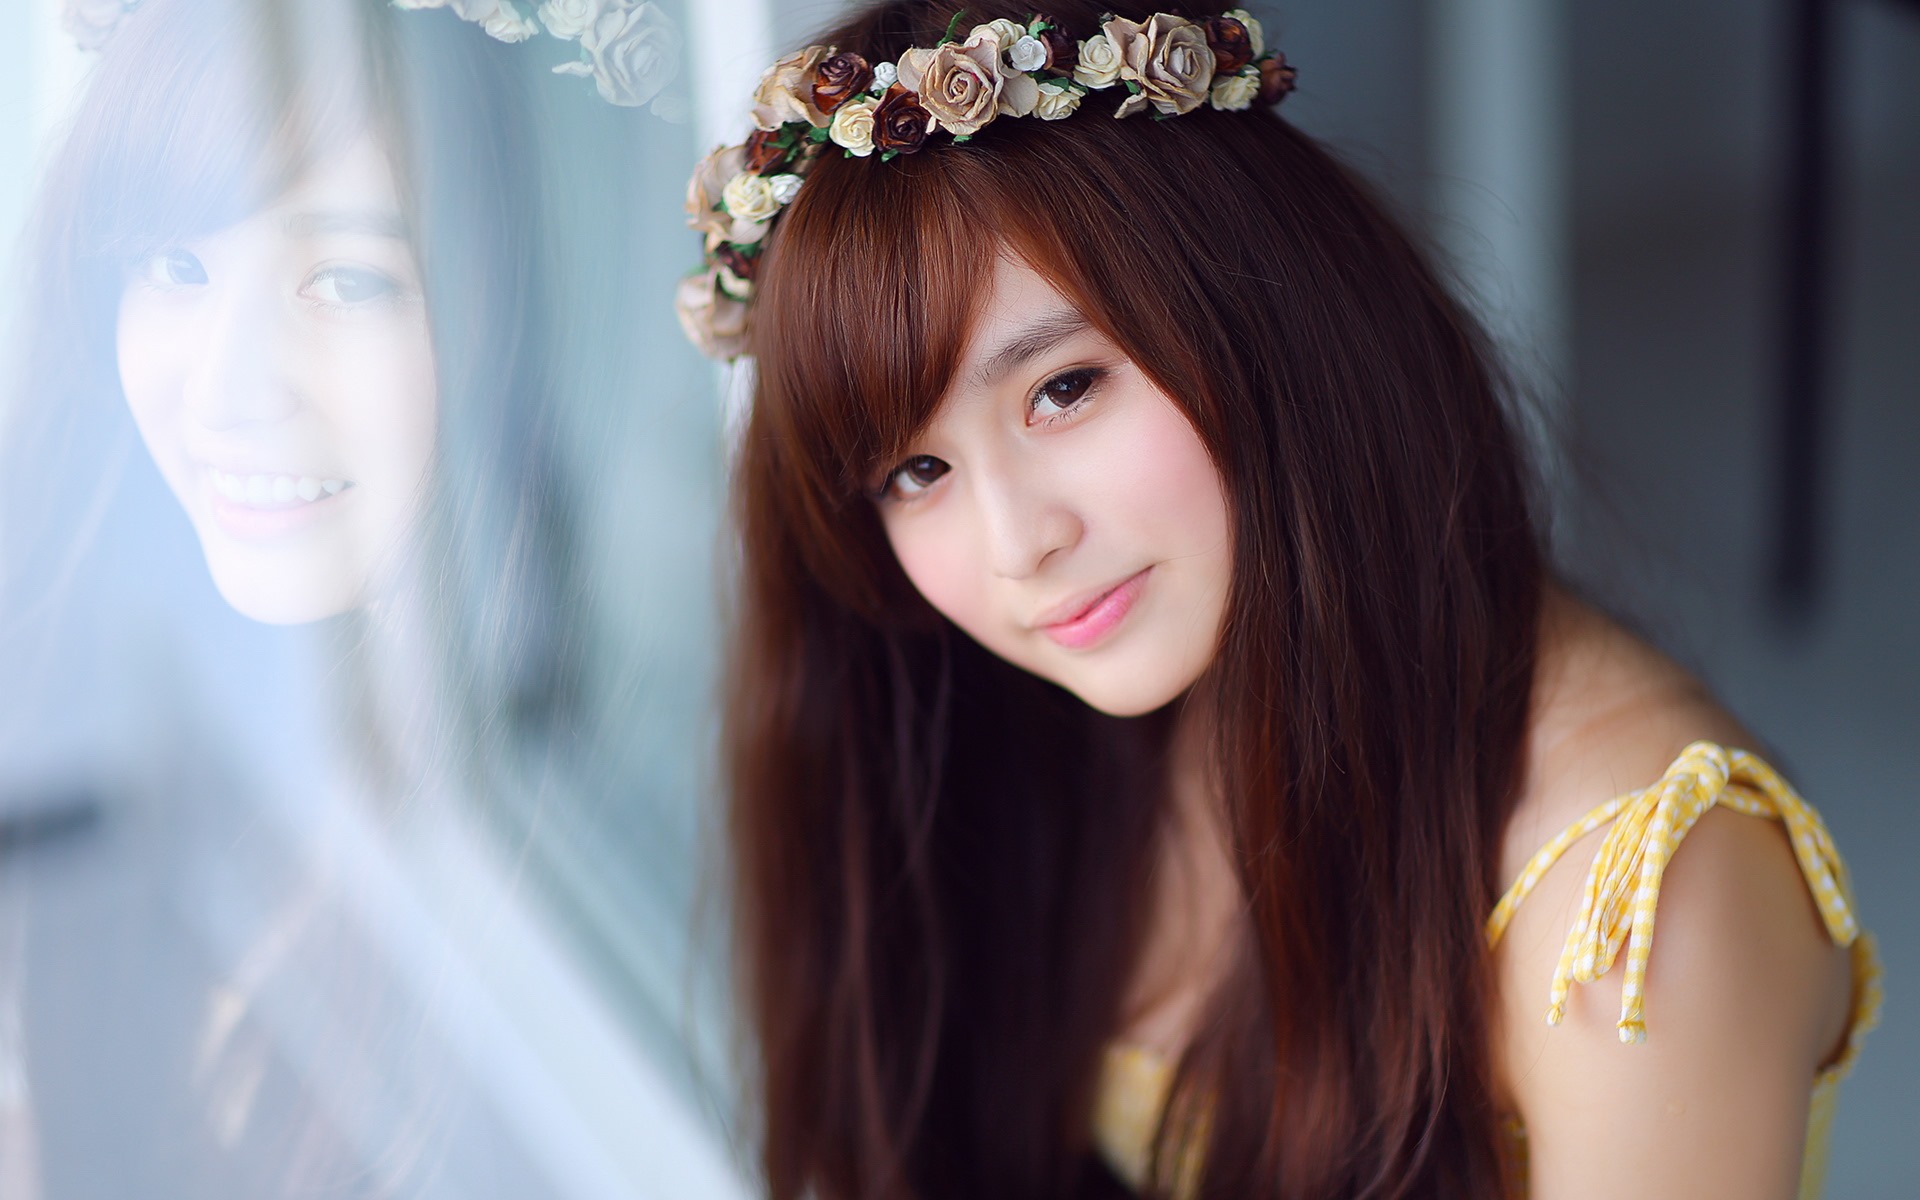 Pure and lovely young Asian girl HD wallpapers collection (3) #9 - 1920x1200